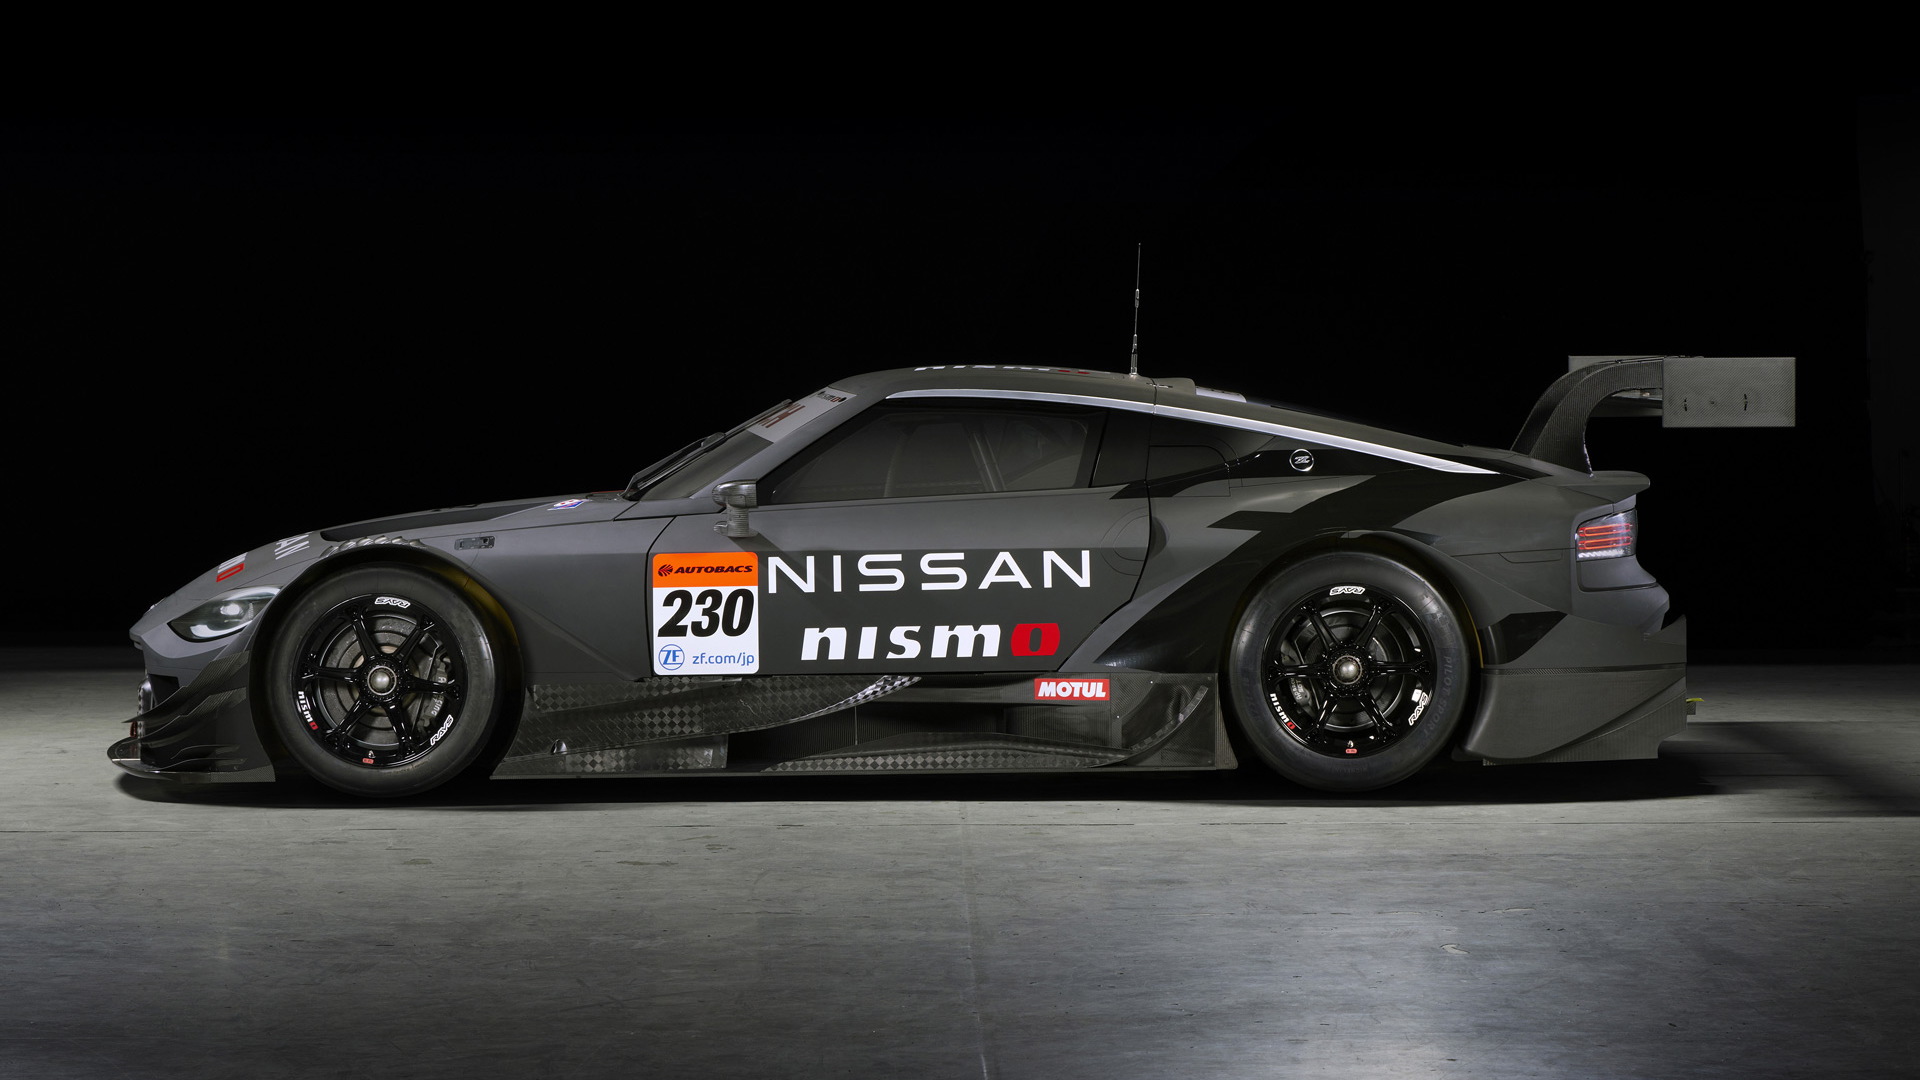 This wide-body Nissan Z GT500 replaces the GT-R in Japan's Super